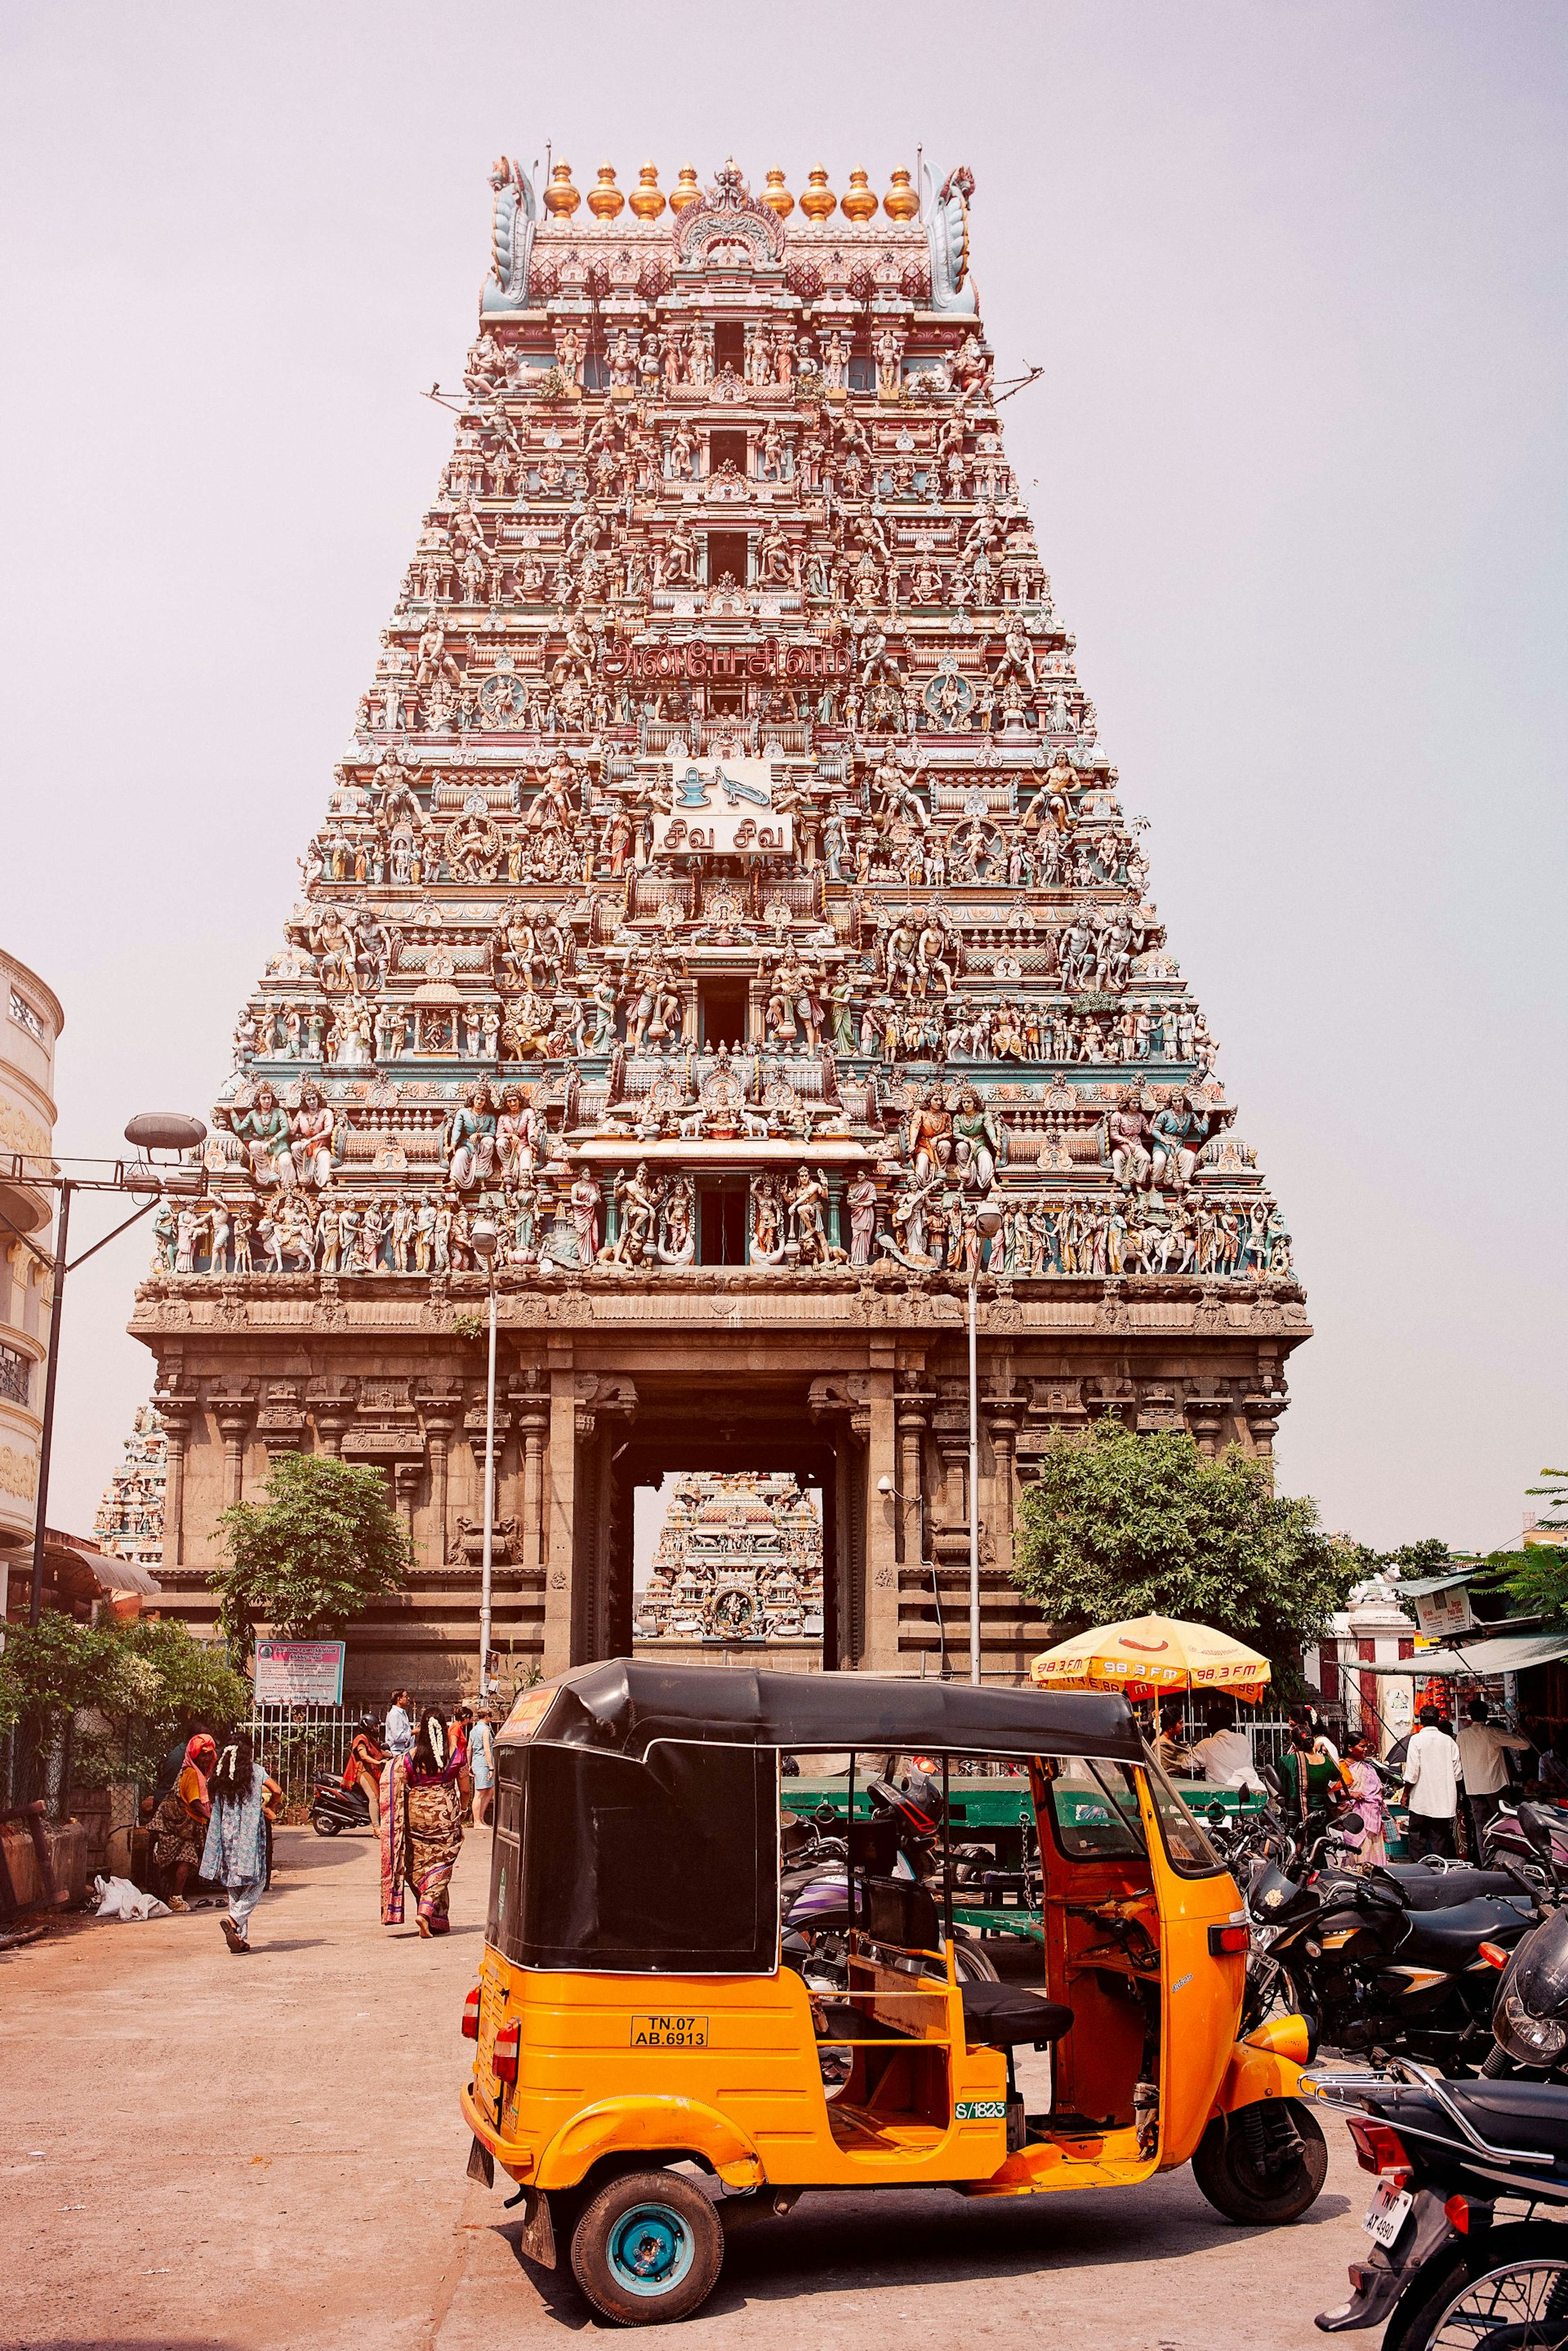 A bright orange motorized rickshaw with a black roof is parked in front of the colorful facade of the the Kapaleeswarar Temple in Chennai, which has several tiers like a pyramid covered in sculptures of humans and animals.